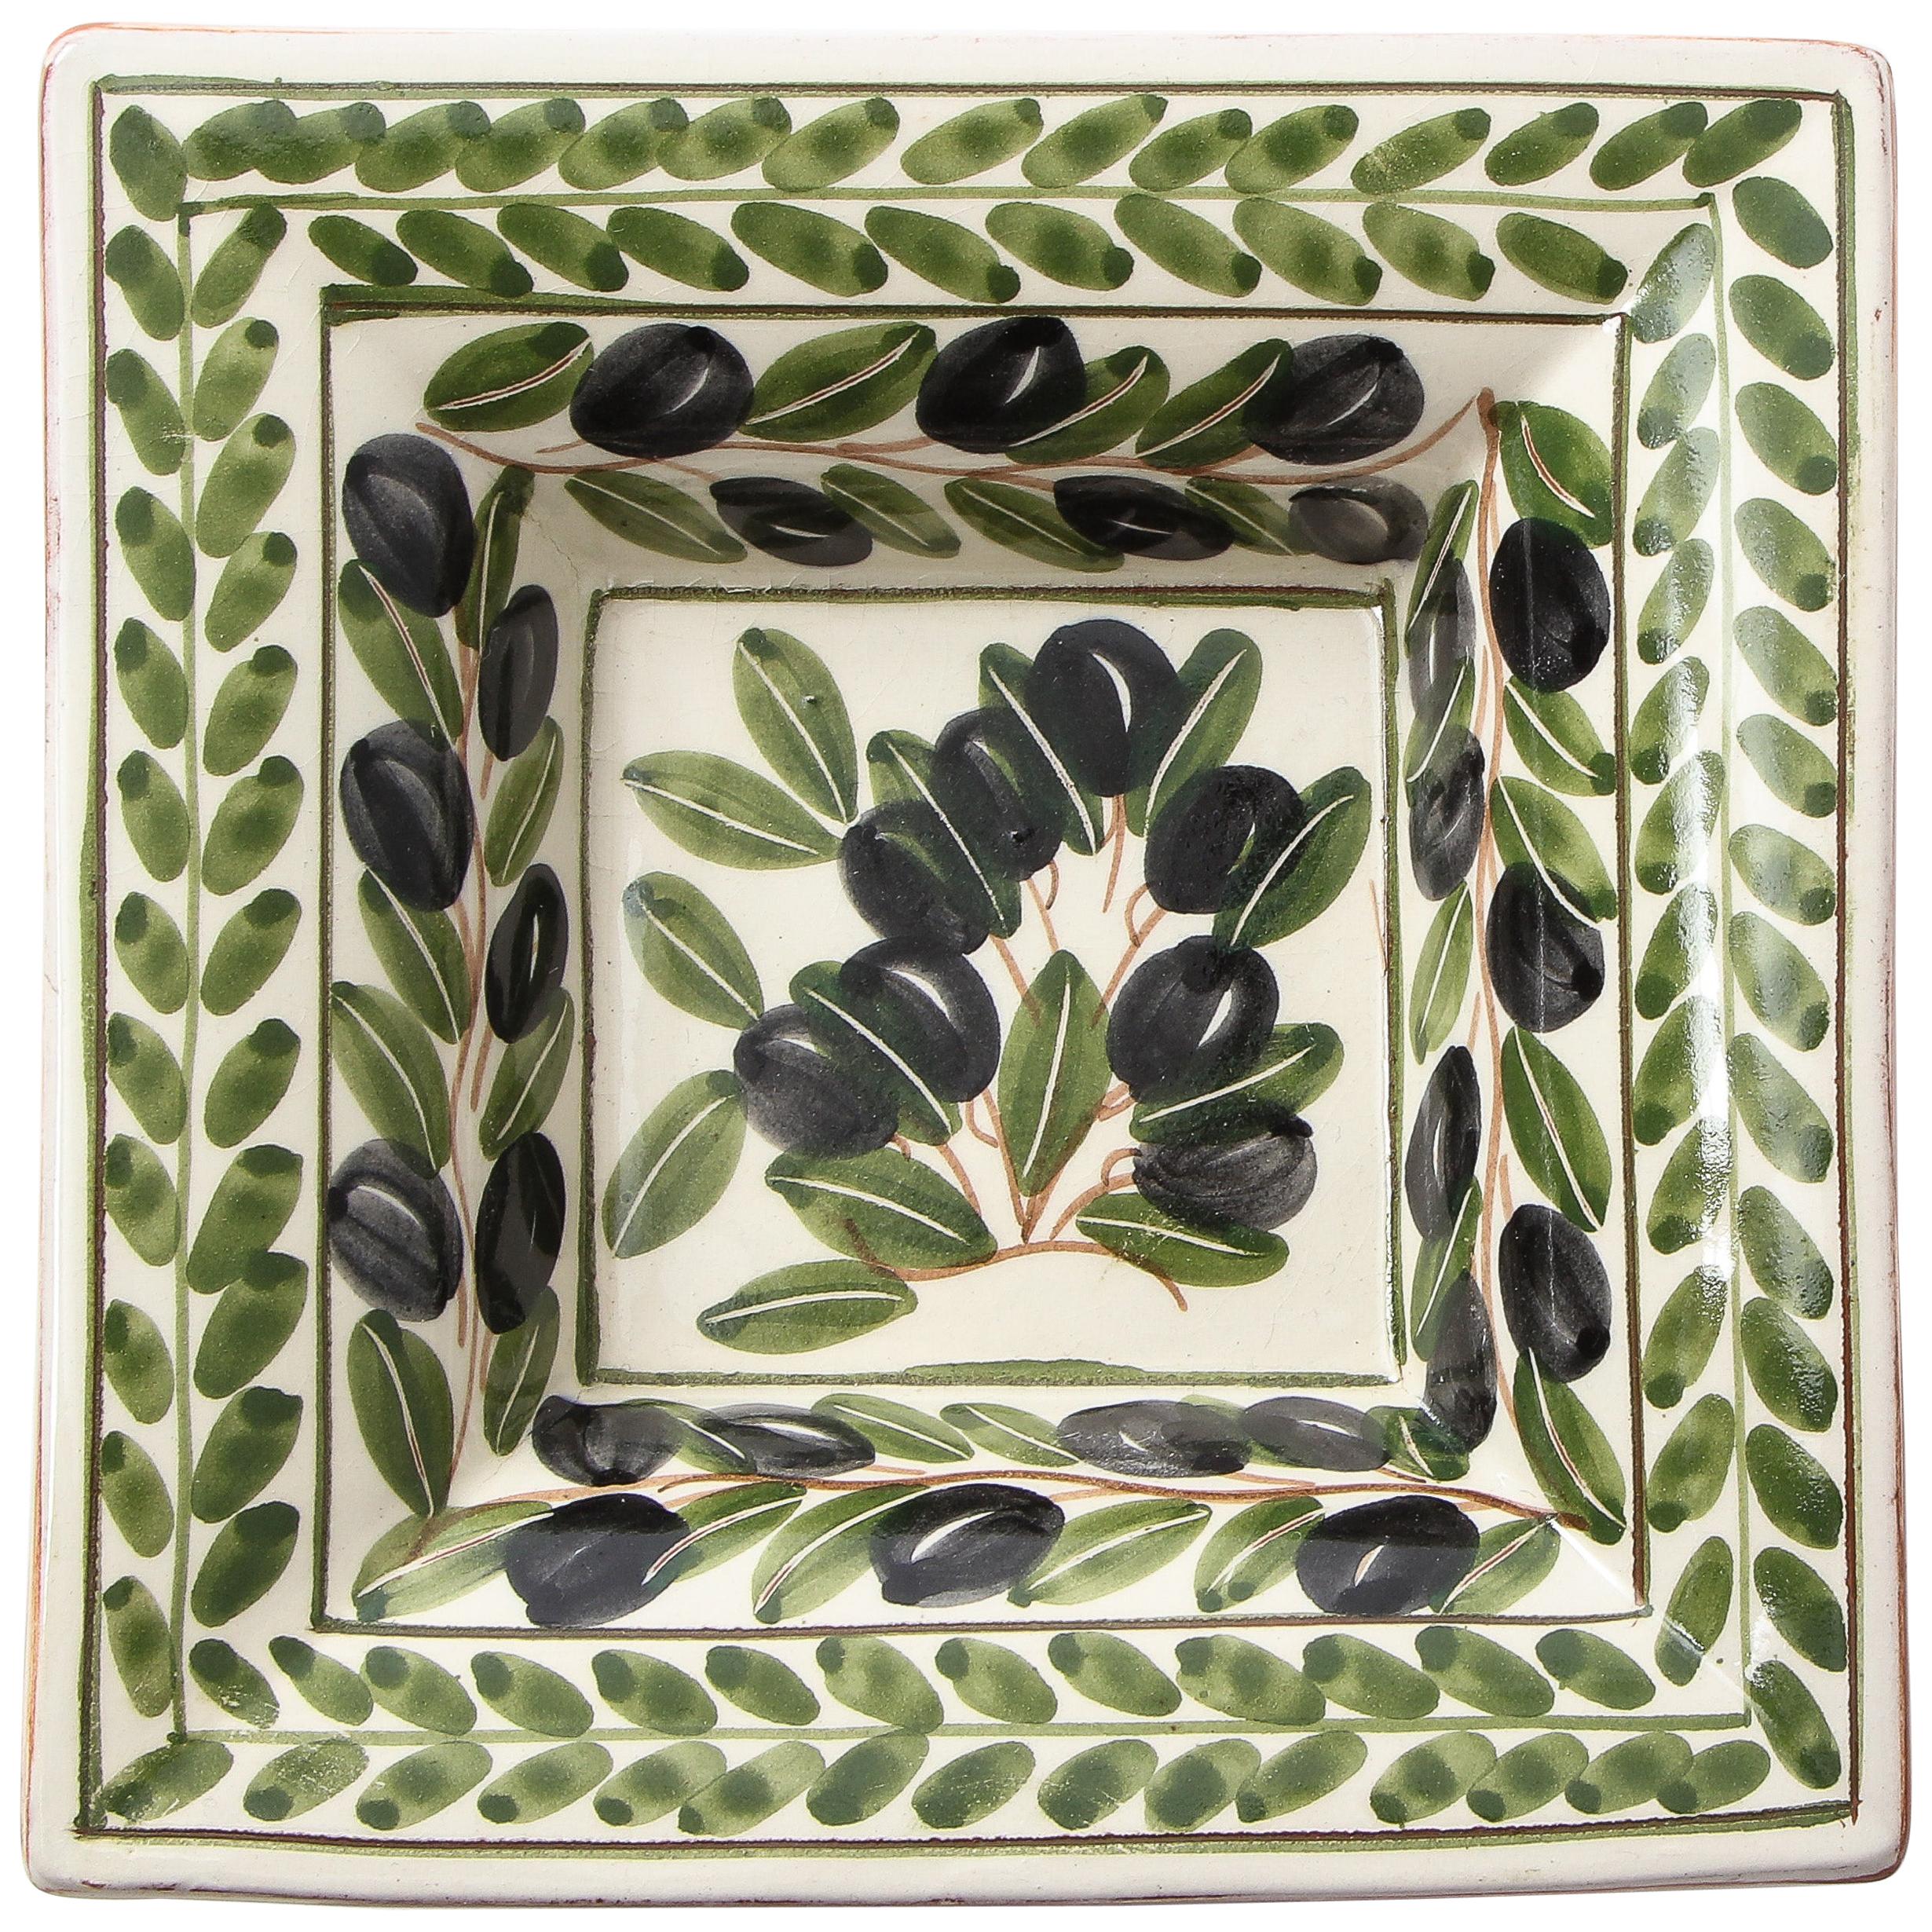 Portugese ceramic vide poche or ashtray adorned with painted olives and their leaves leaves. Underneath is a glazed terra cotta color.